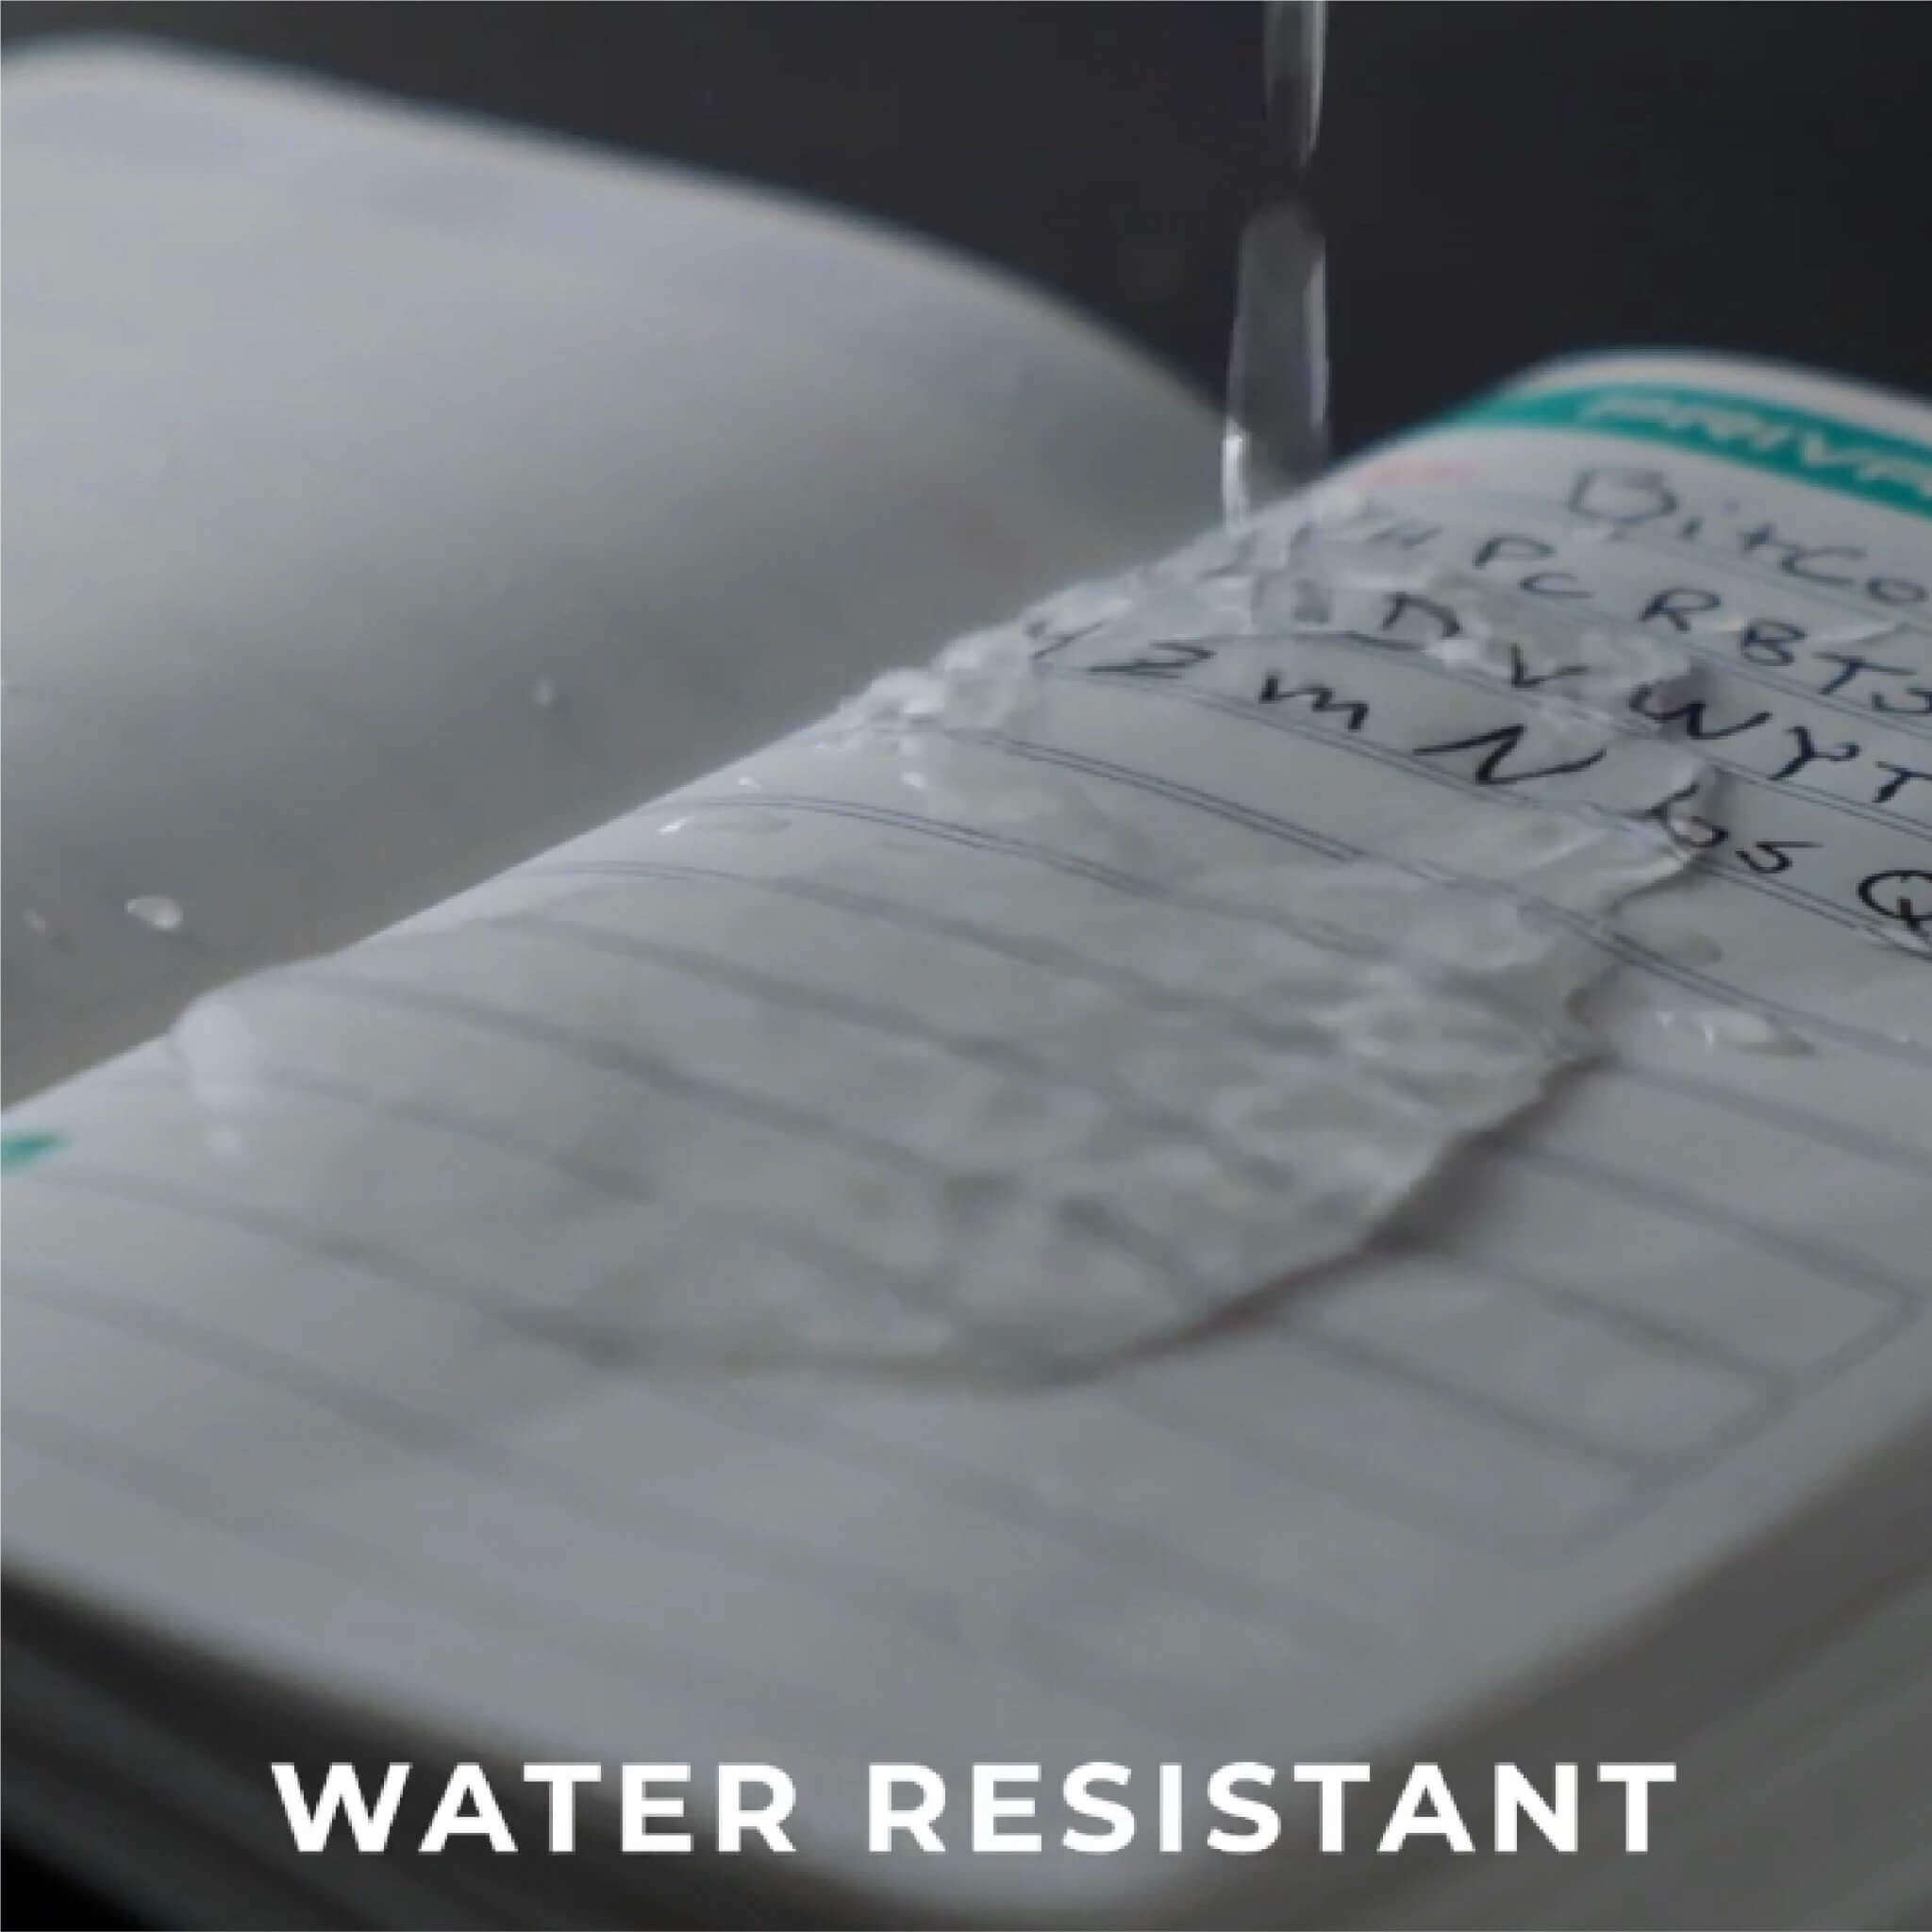 Stonebook pages are water resistant from floods or coffee spills